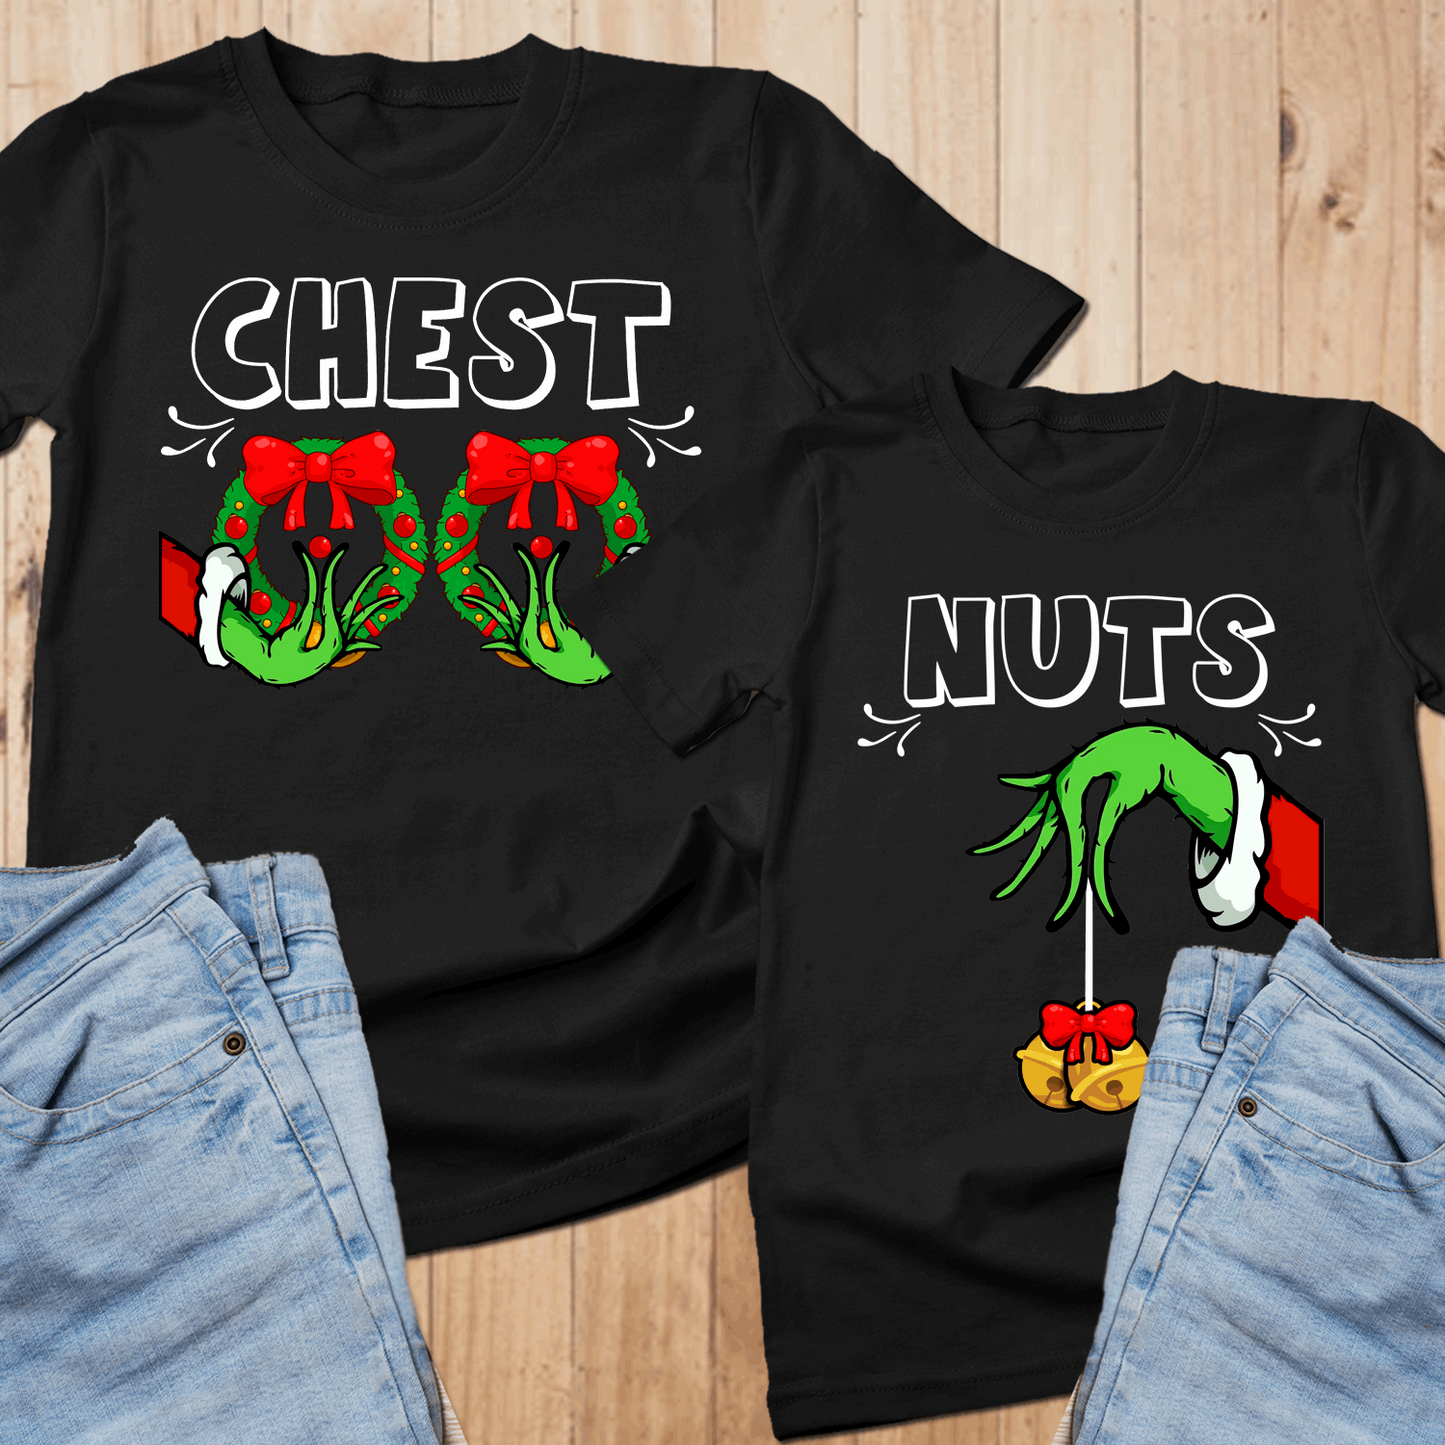 Chest Nuts Couples Matching Shirts, Funny Christmas Matching Shirts, Holiday Sweatshirt, Cute Christmas Shirt, Couple Sweater, Family Tee - Wilson Design Group